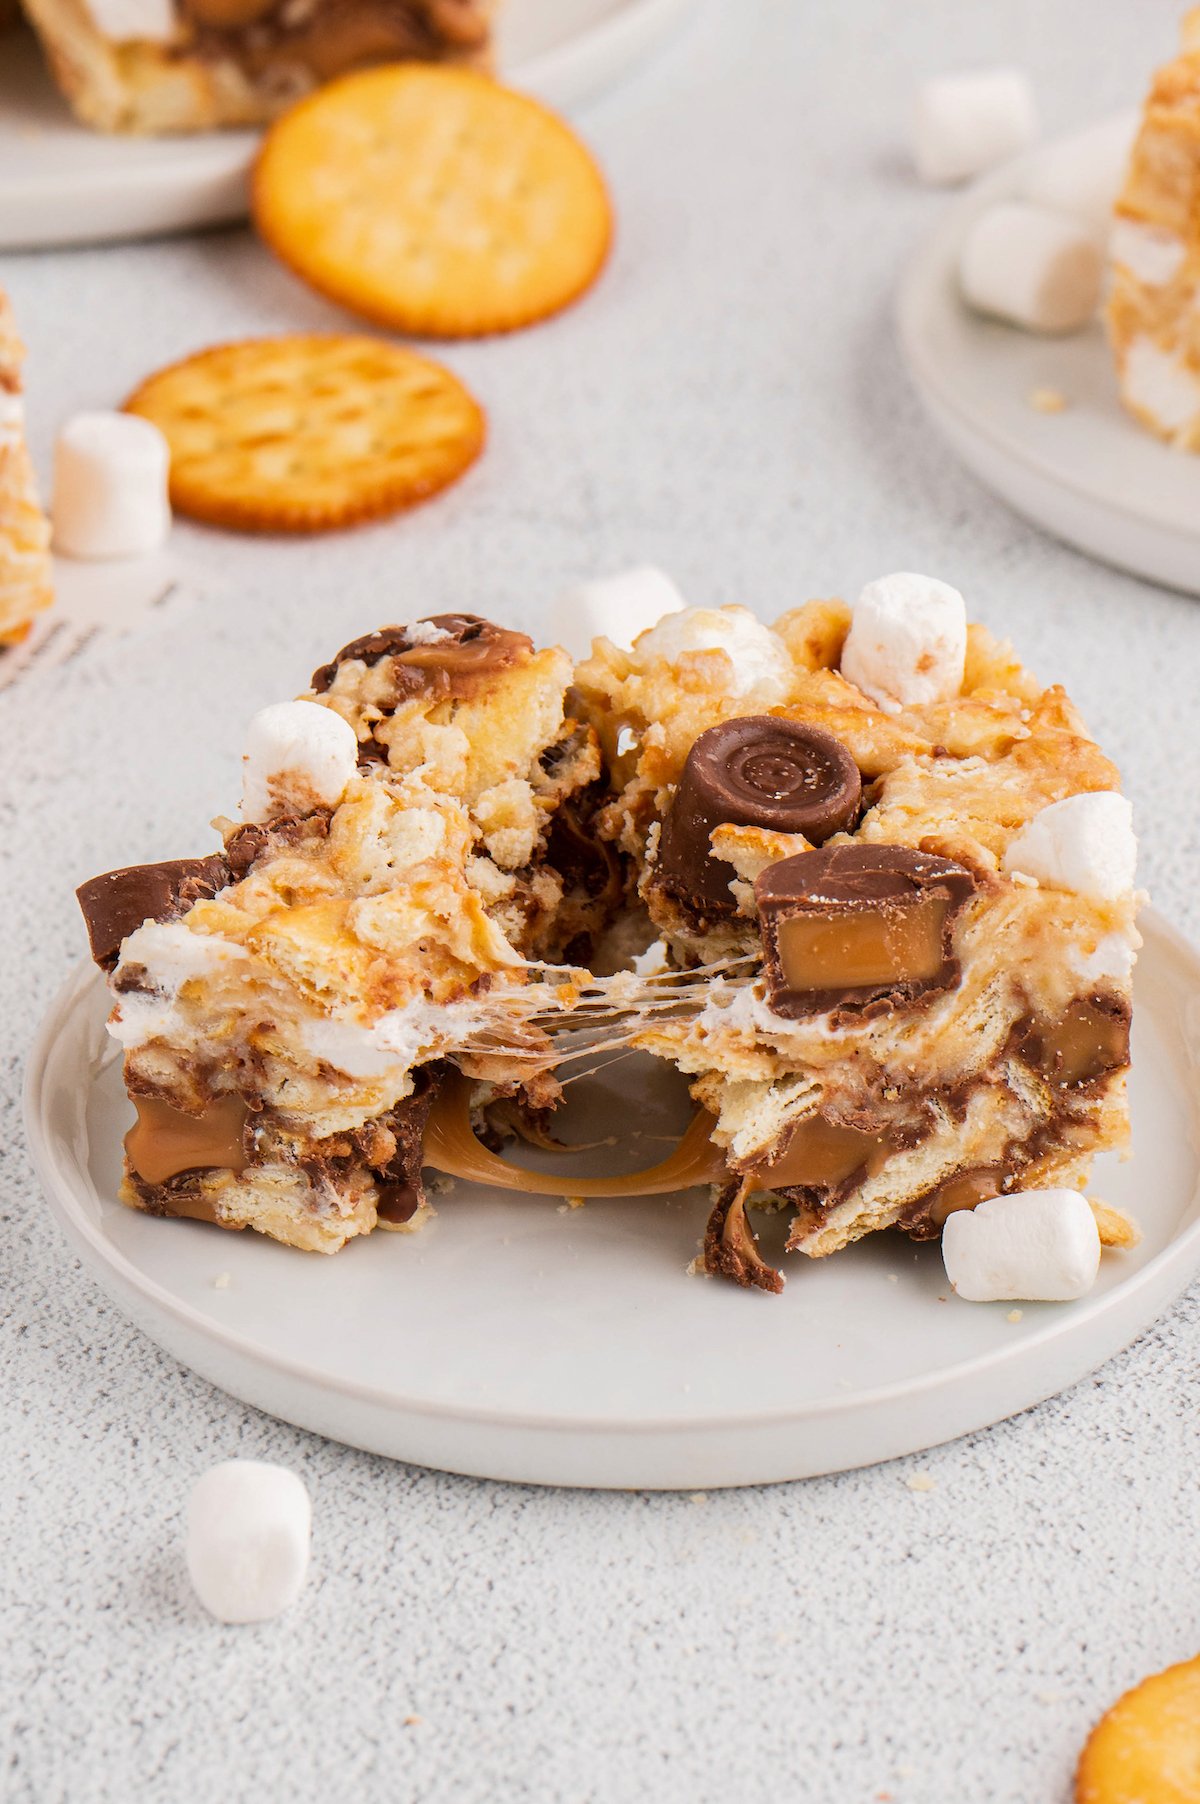 A rolo ritz marshmallow treat on a plate, pulled apart to show the gooey texture of the candies and marshmallow.